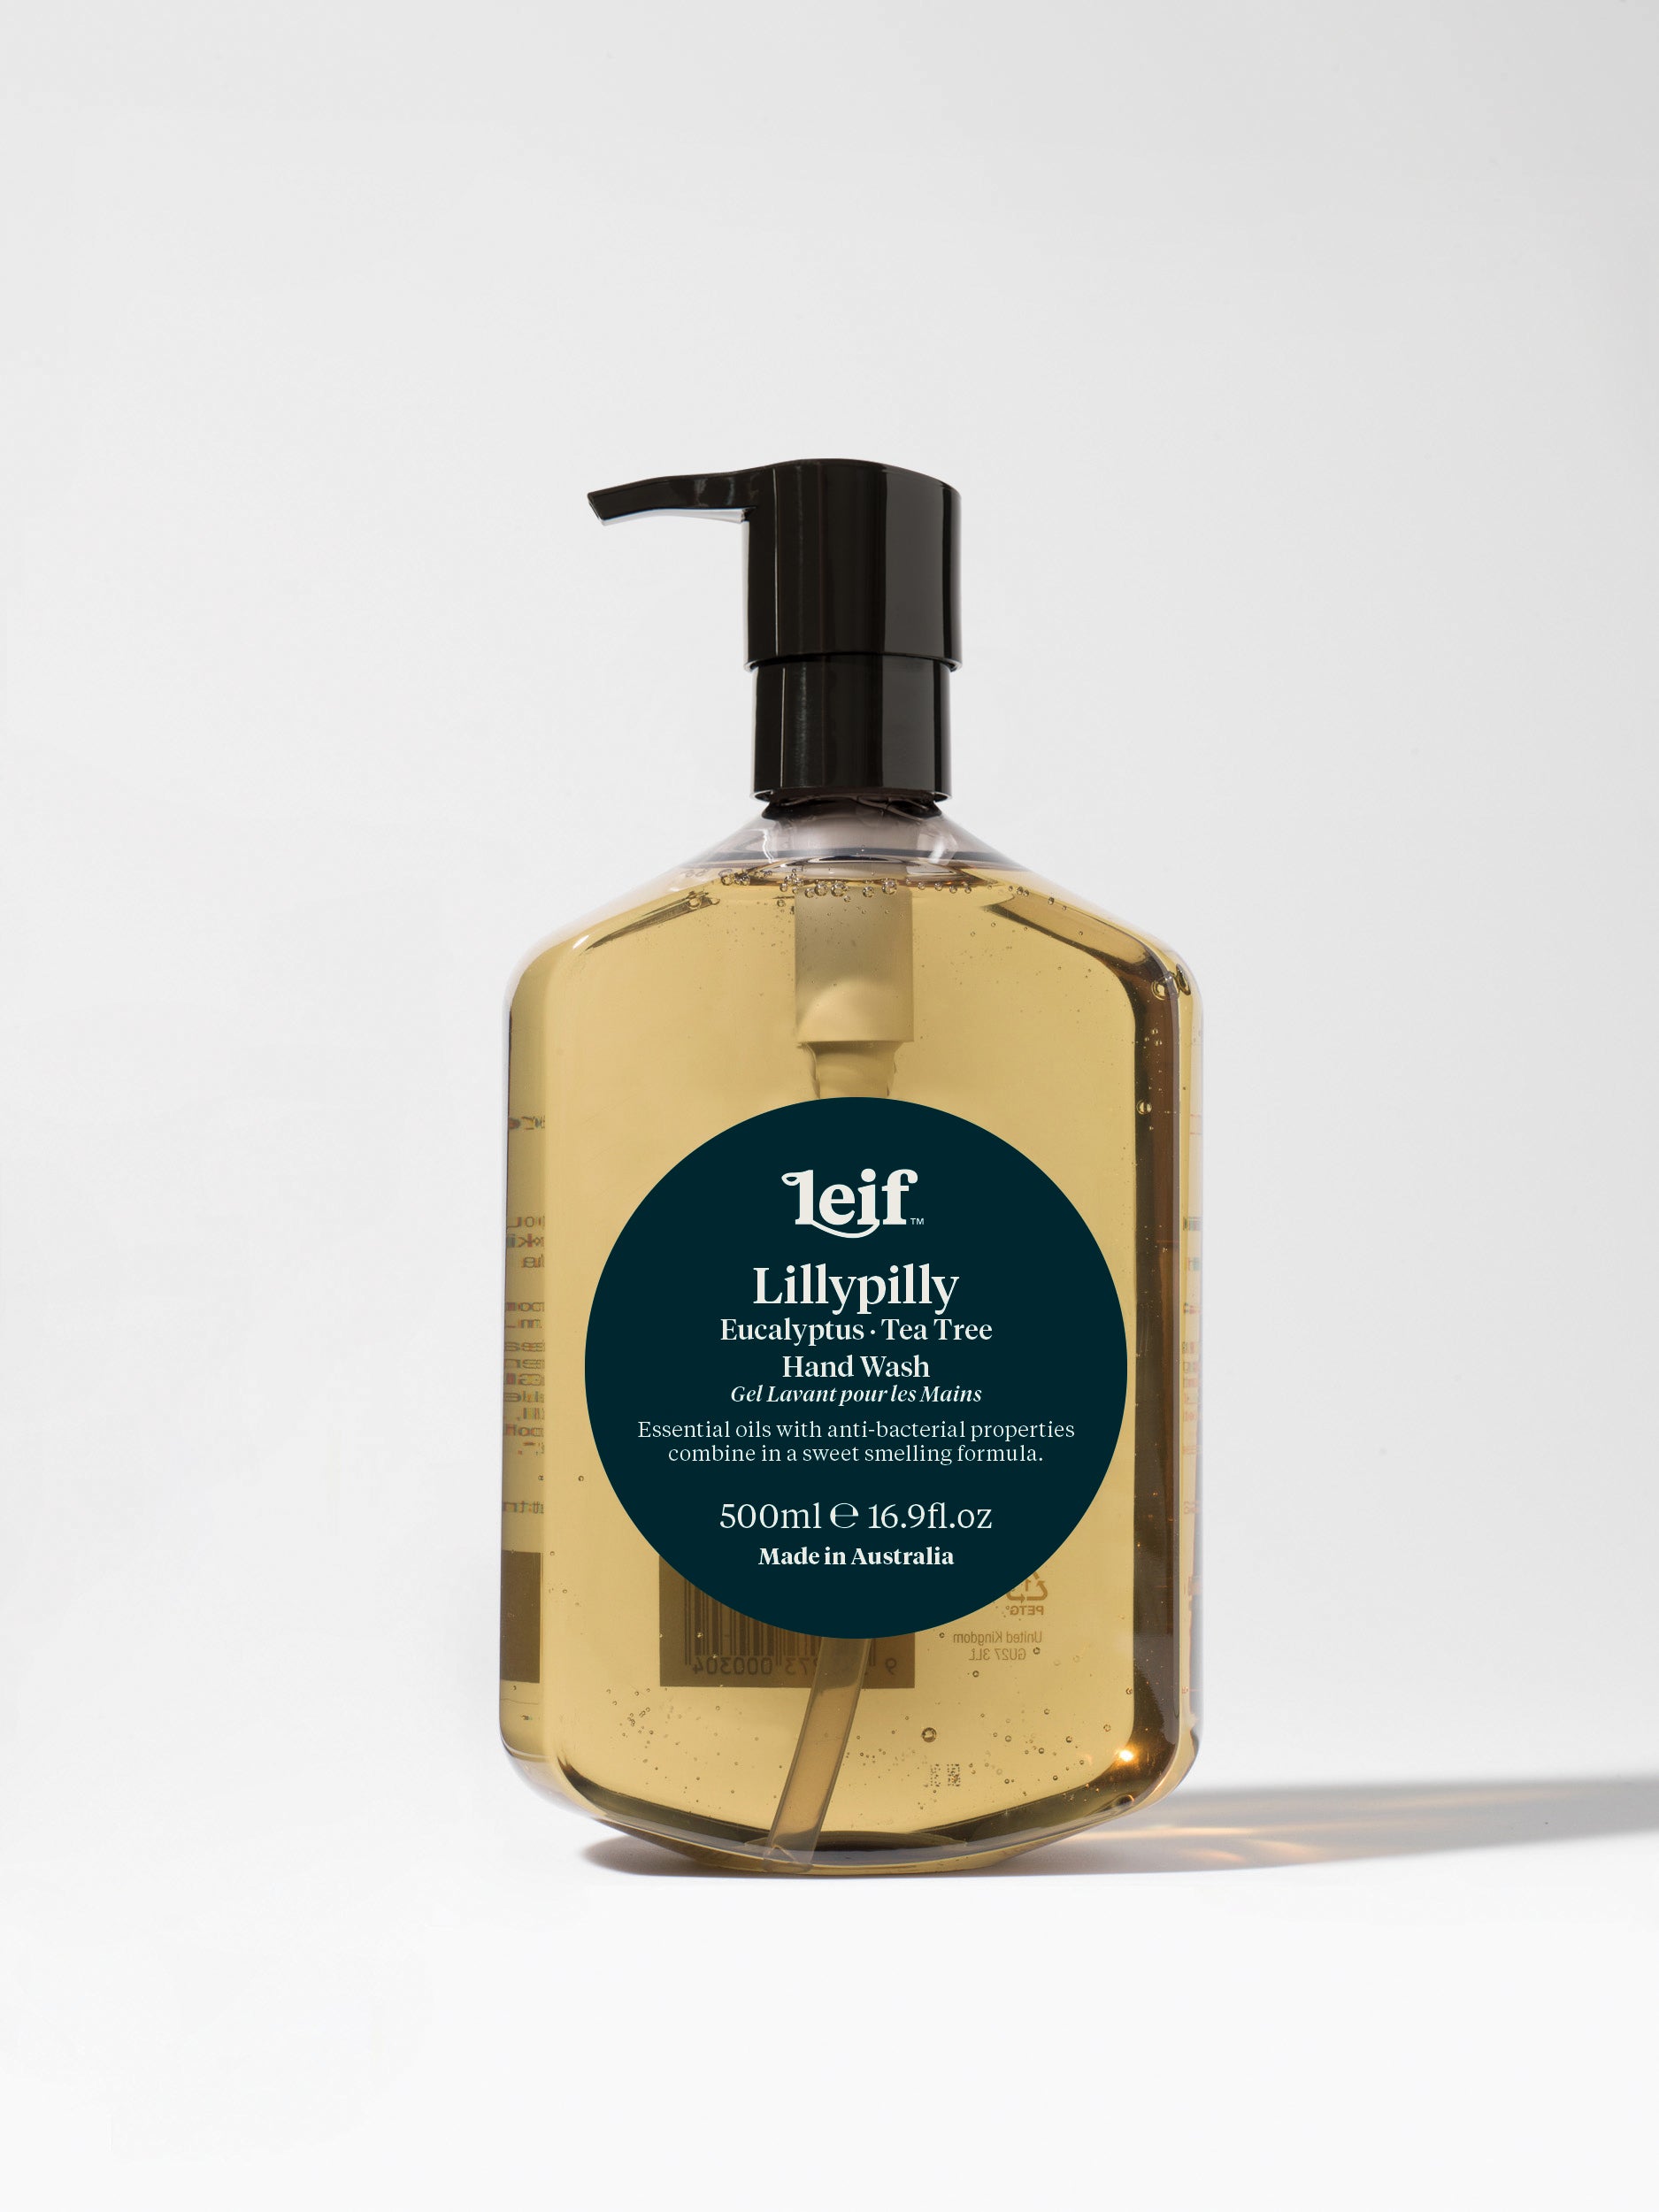 Leif - Lillypilly Hand Wash